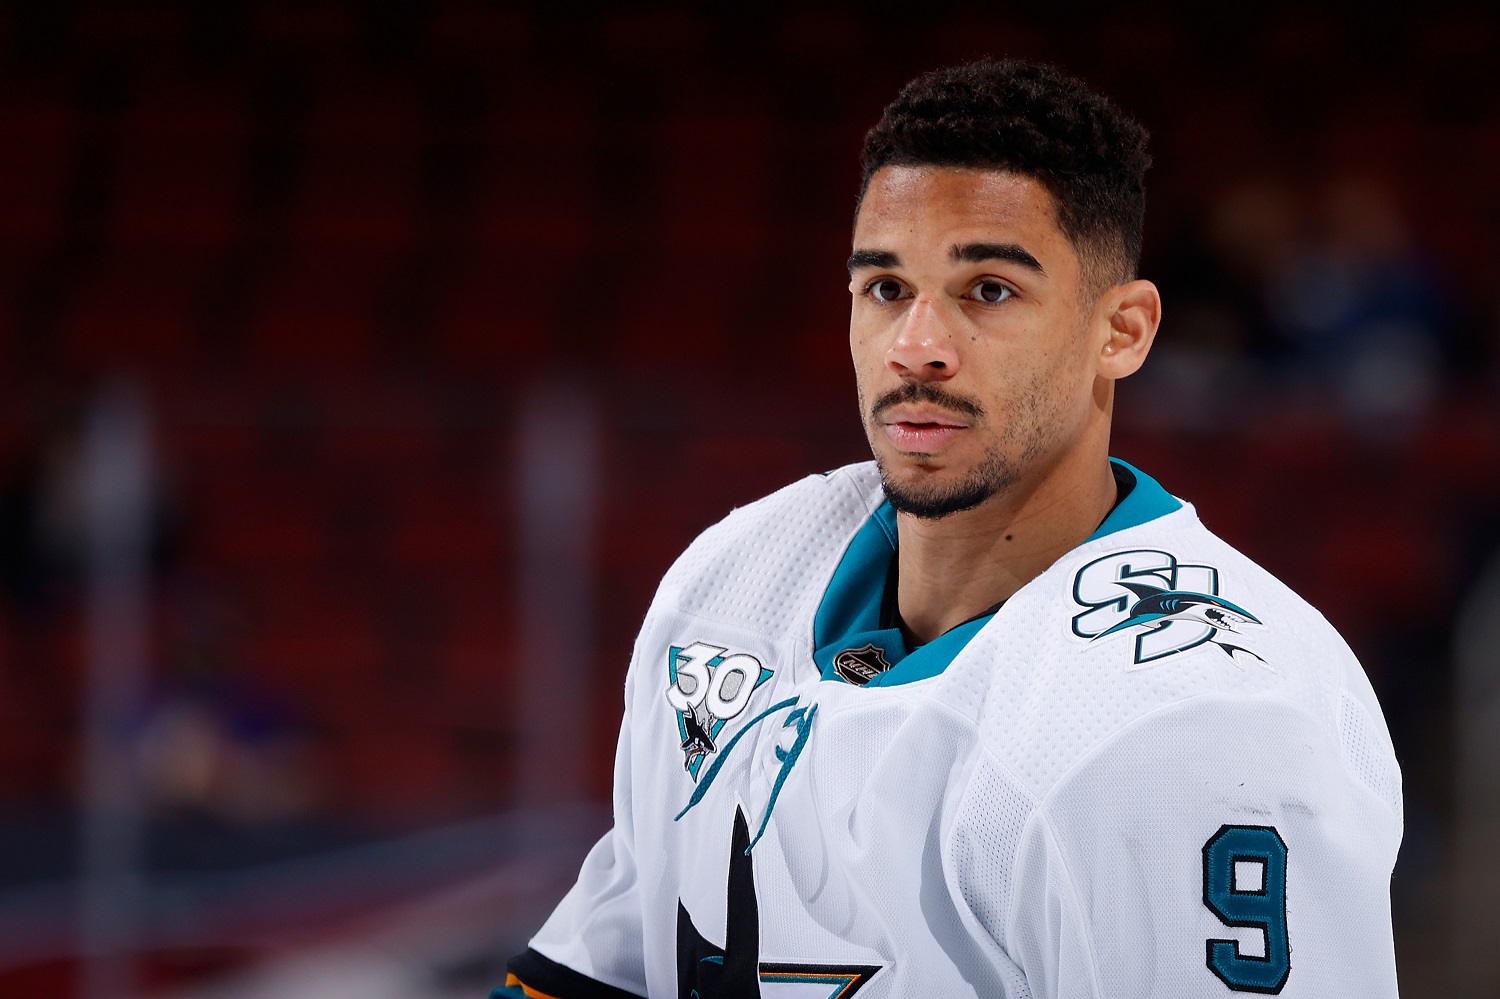 Evander Kane of the San Jose Sharks warms up during the NHL game against the Arizona Coyotes at Gila River Arena on March 27, 2021, in Glendale, Arizona.